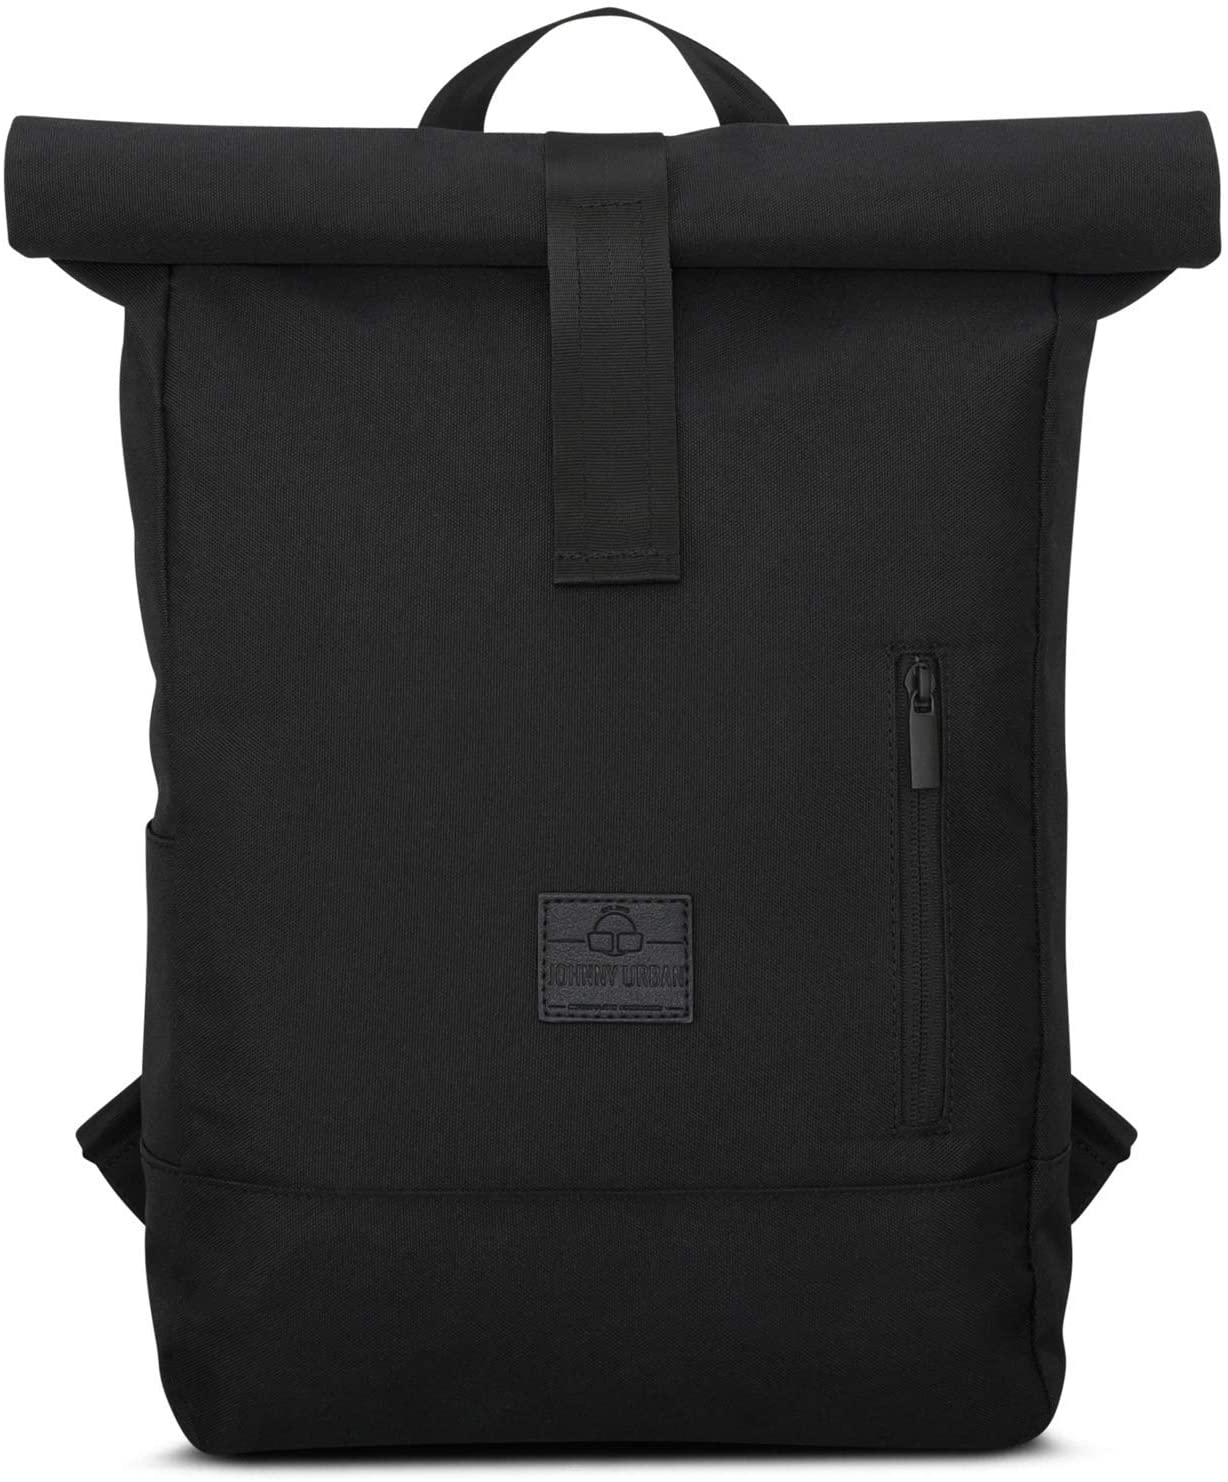 JOHNNY URBAN Robin Casual Daypack Laptop Pocket Roll Top Backpack